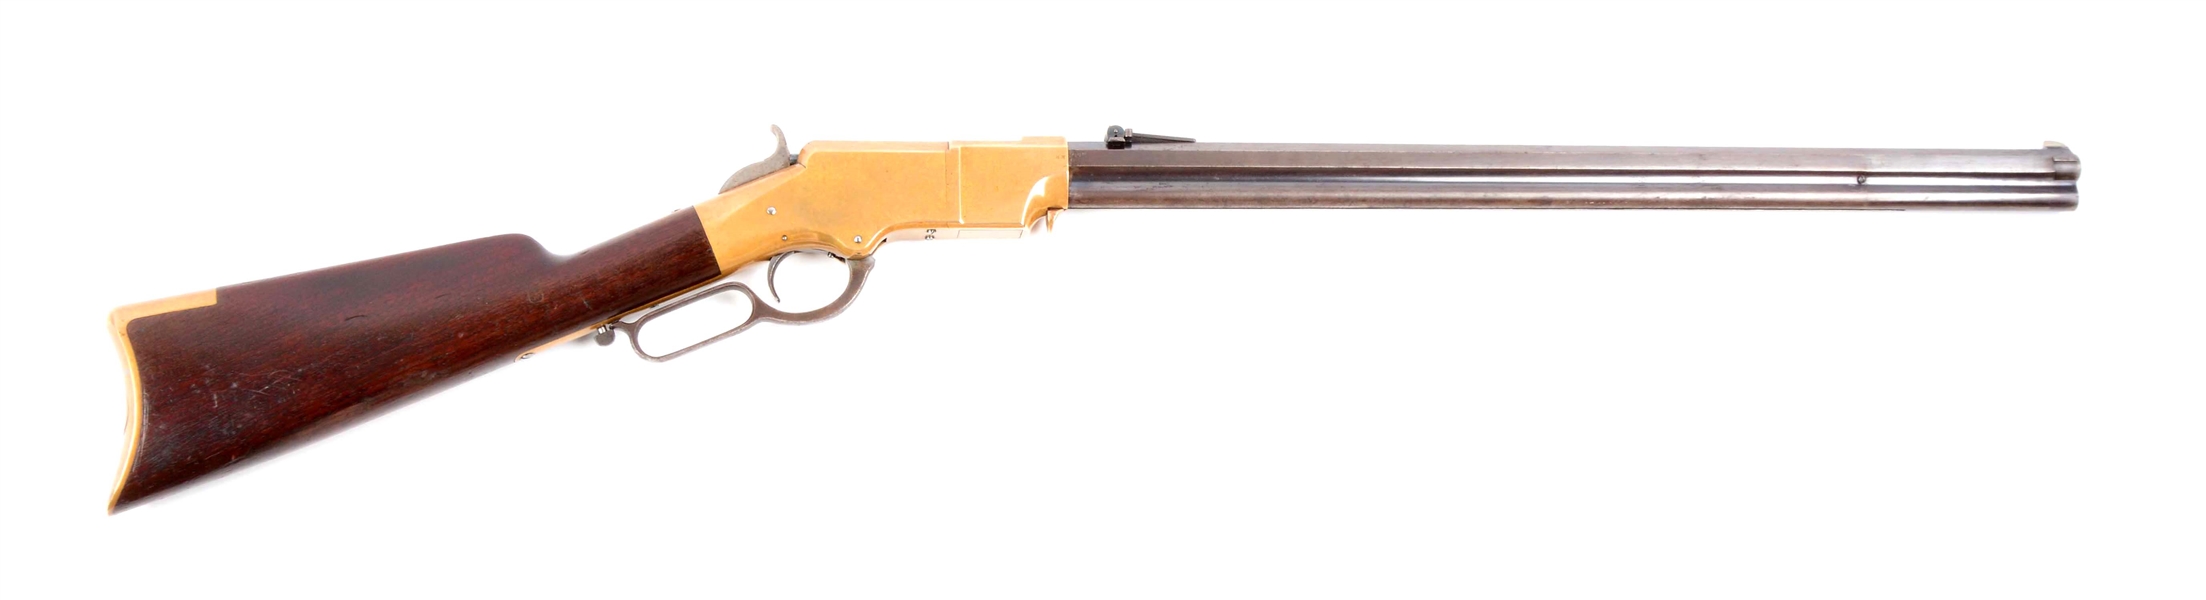 (A) PHENOMENAL IDENTIFIED MARTIALLY MARKED HENRY LEVER ACTION REPEATING RIFLE.